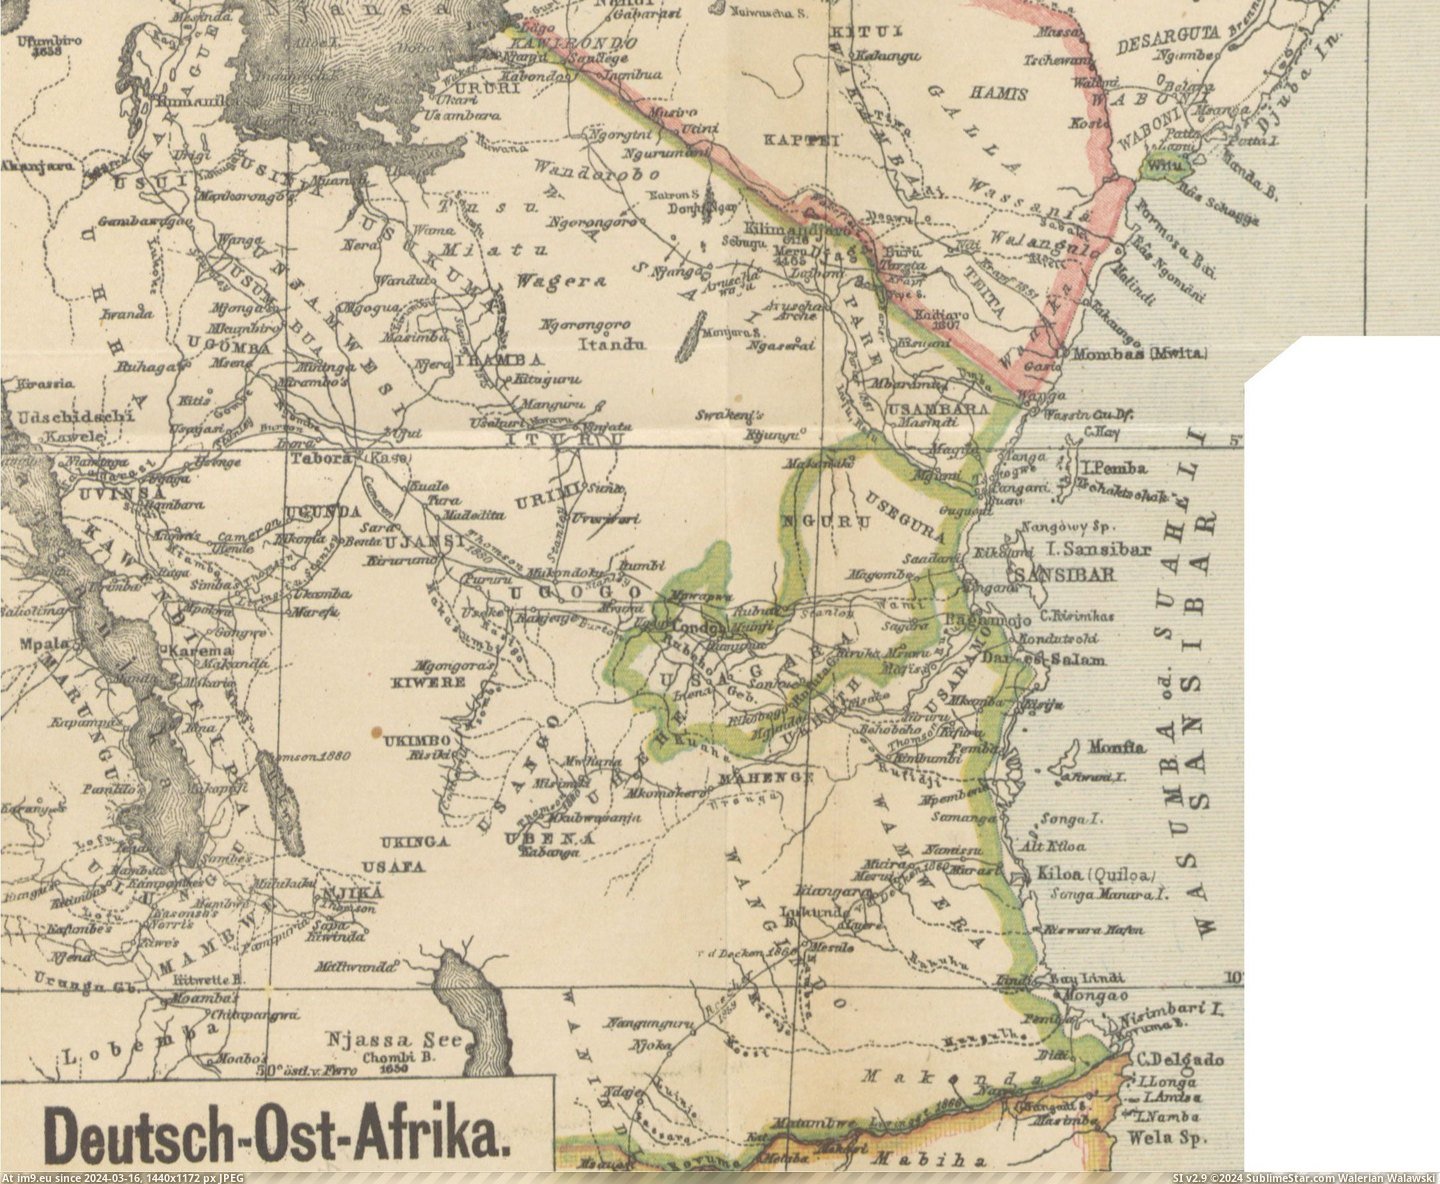 #People #Non #Country #East #Description #Colonies #Germany #Africa #German [Mapporn] German East Africa (Deutsh-Ost-Afrika) from Germany's colonies, Brief description of the country and people of our non Pic. (Image of album My r/MAPS favs))